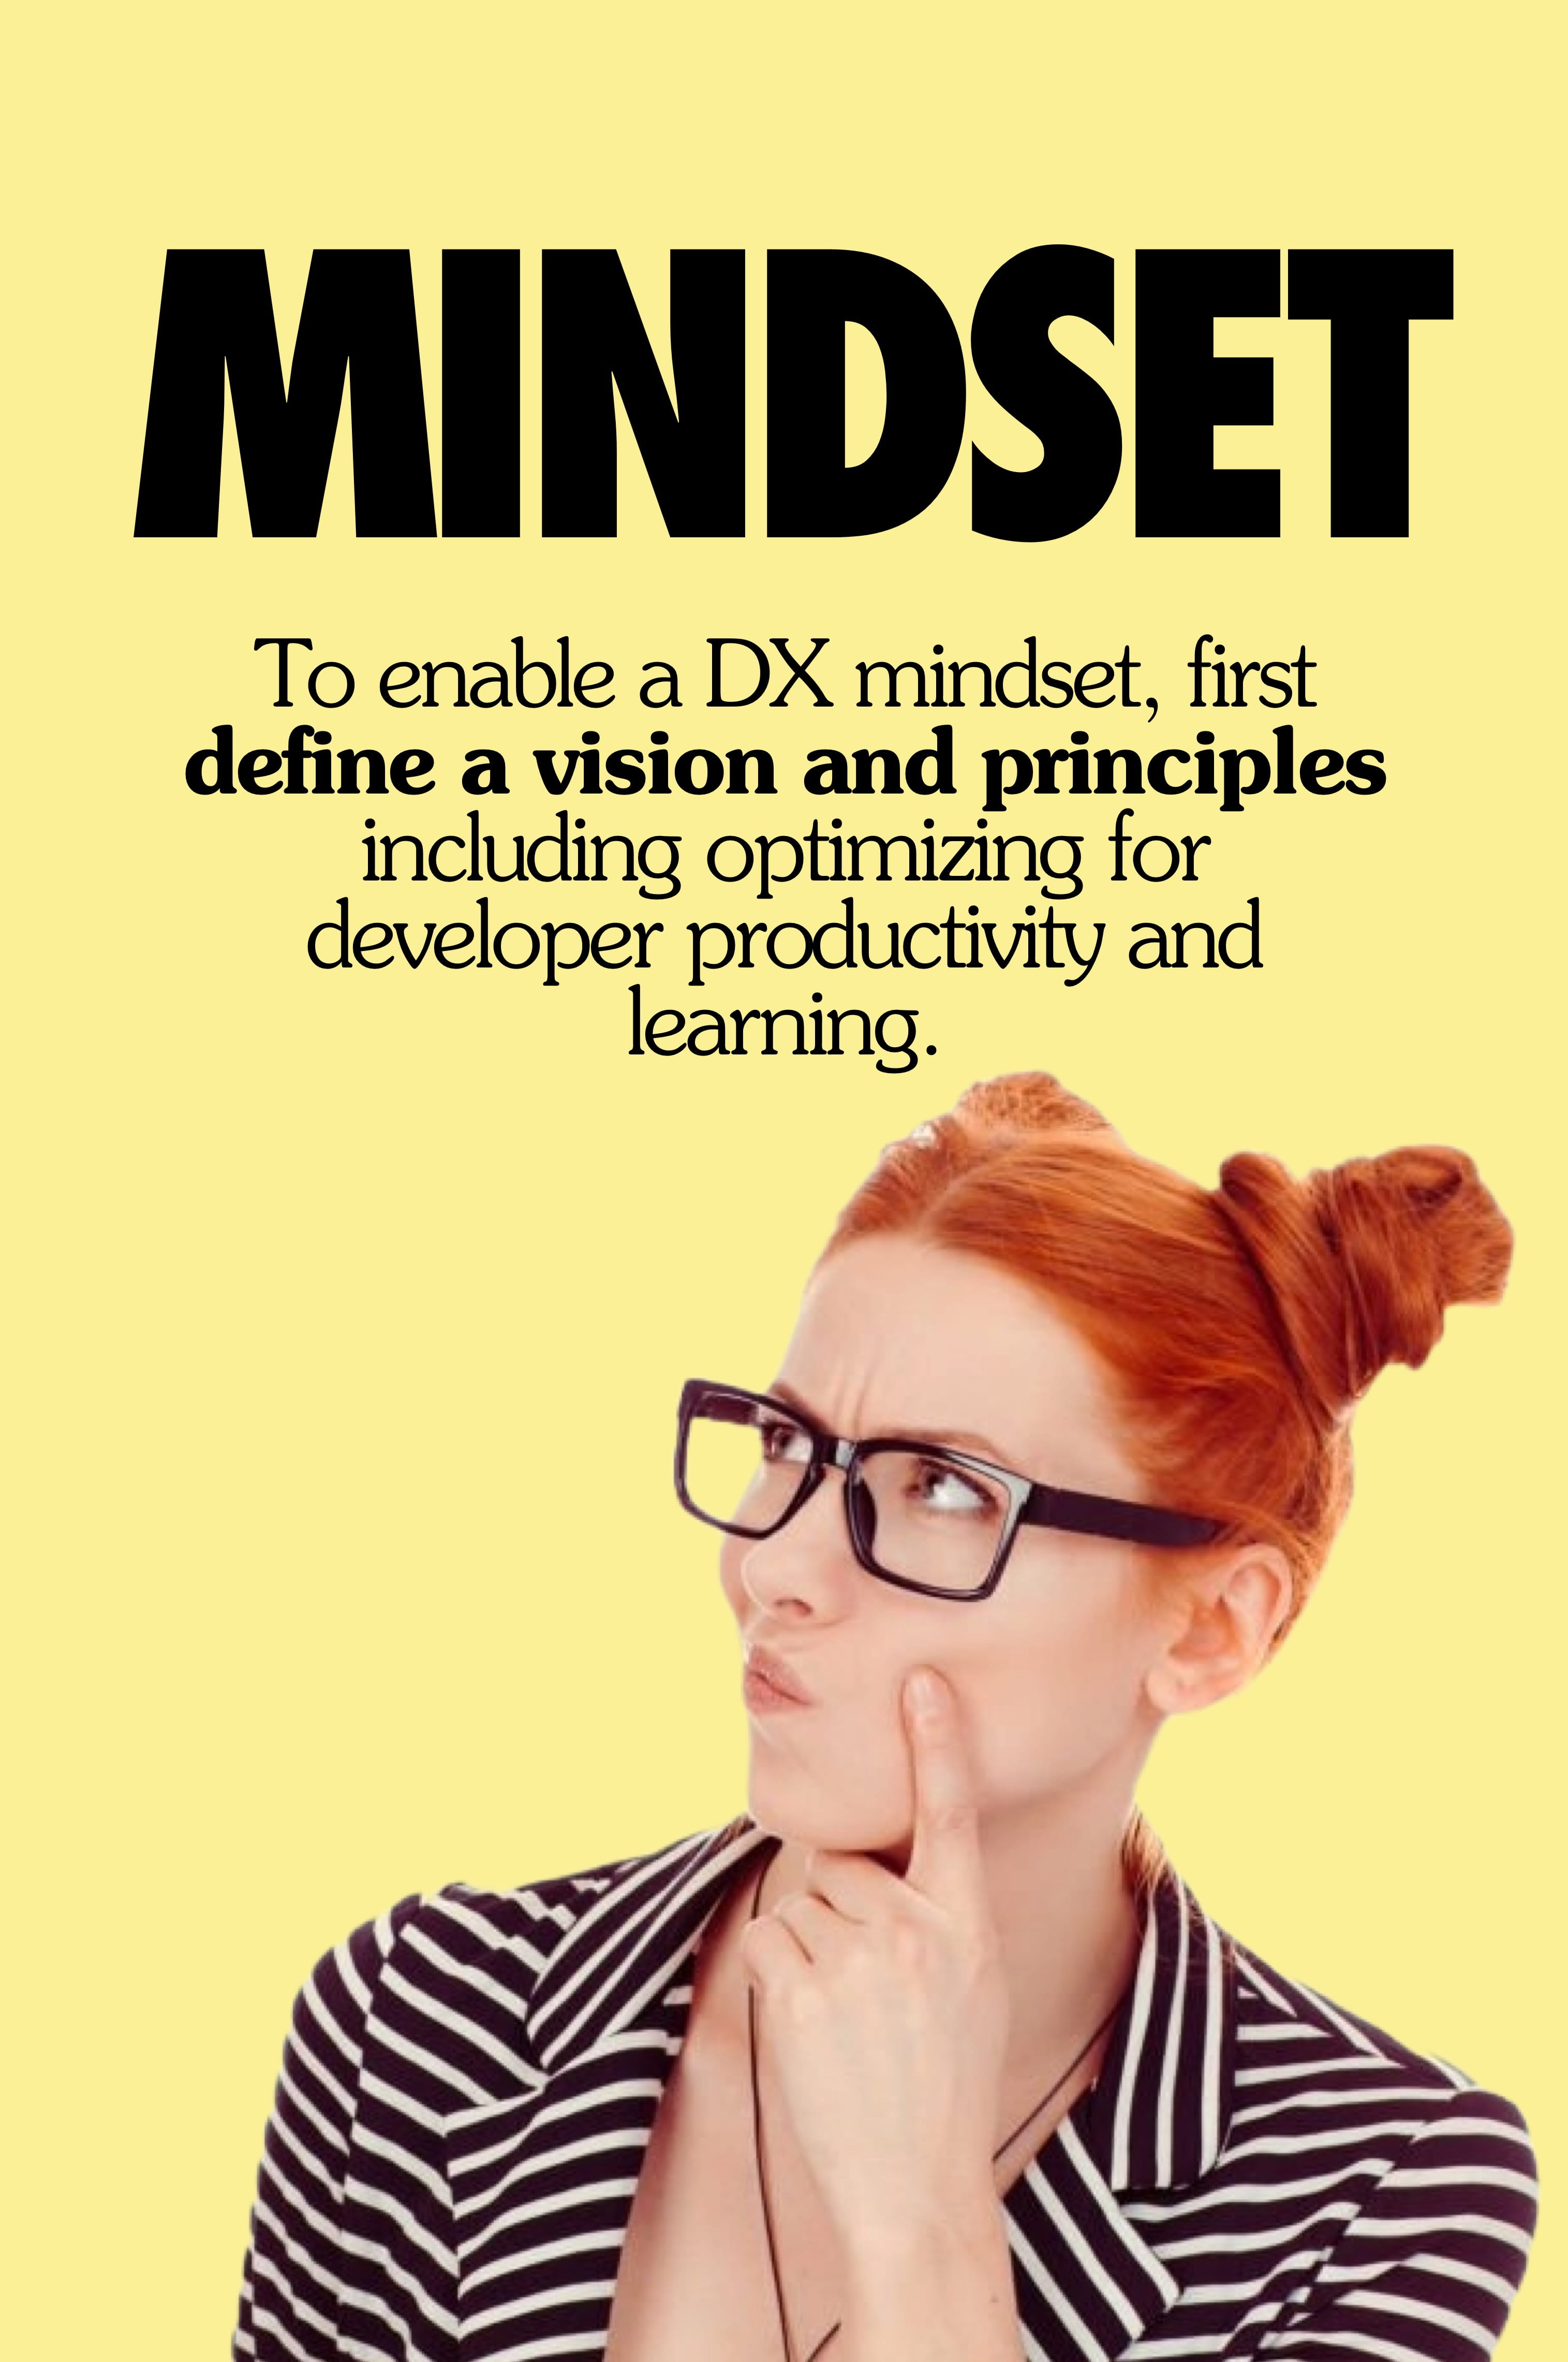 To enable a DX mindset, first define a vision and principles to guide DX efforts, like optimizing for developer productivity and learning.